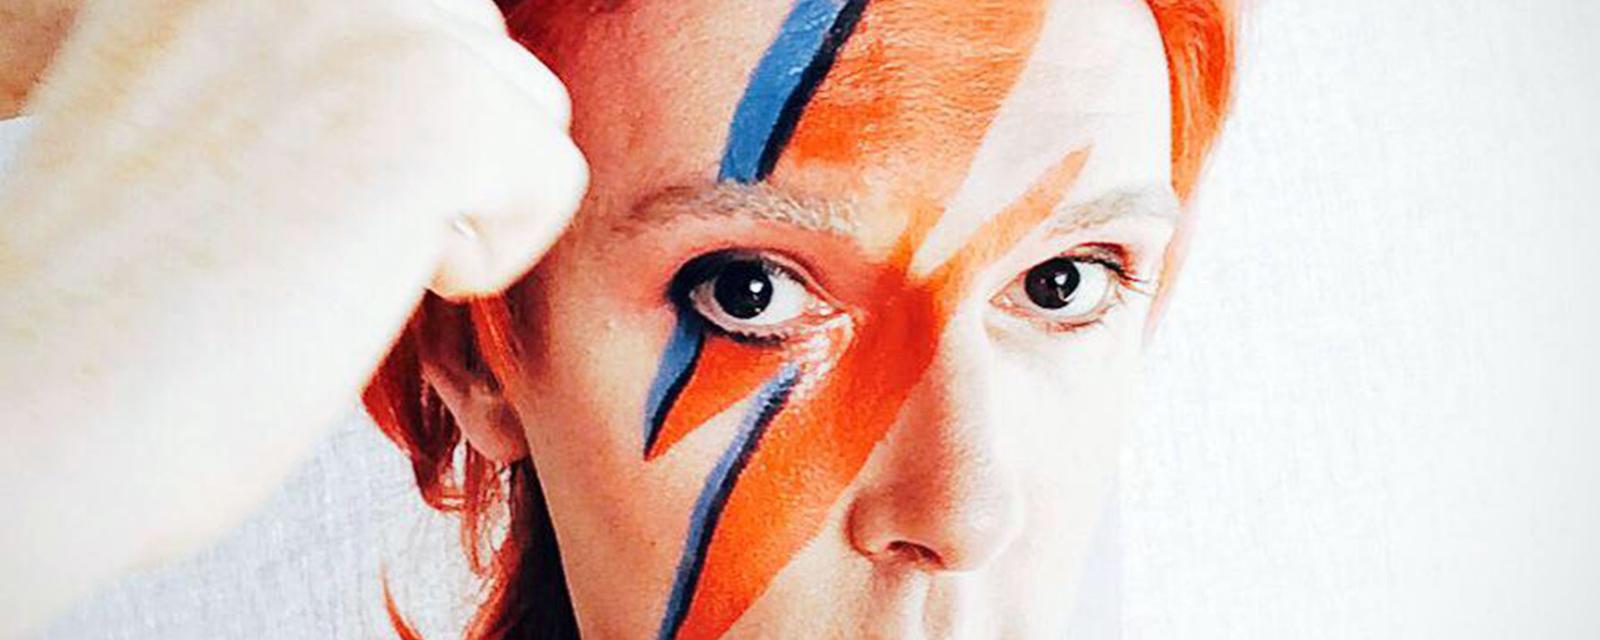 Bowie is Forever Stardust: Kingston’s David Bowie on Bowie’s death